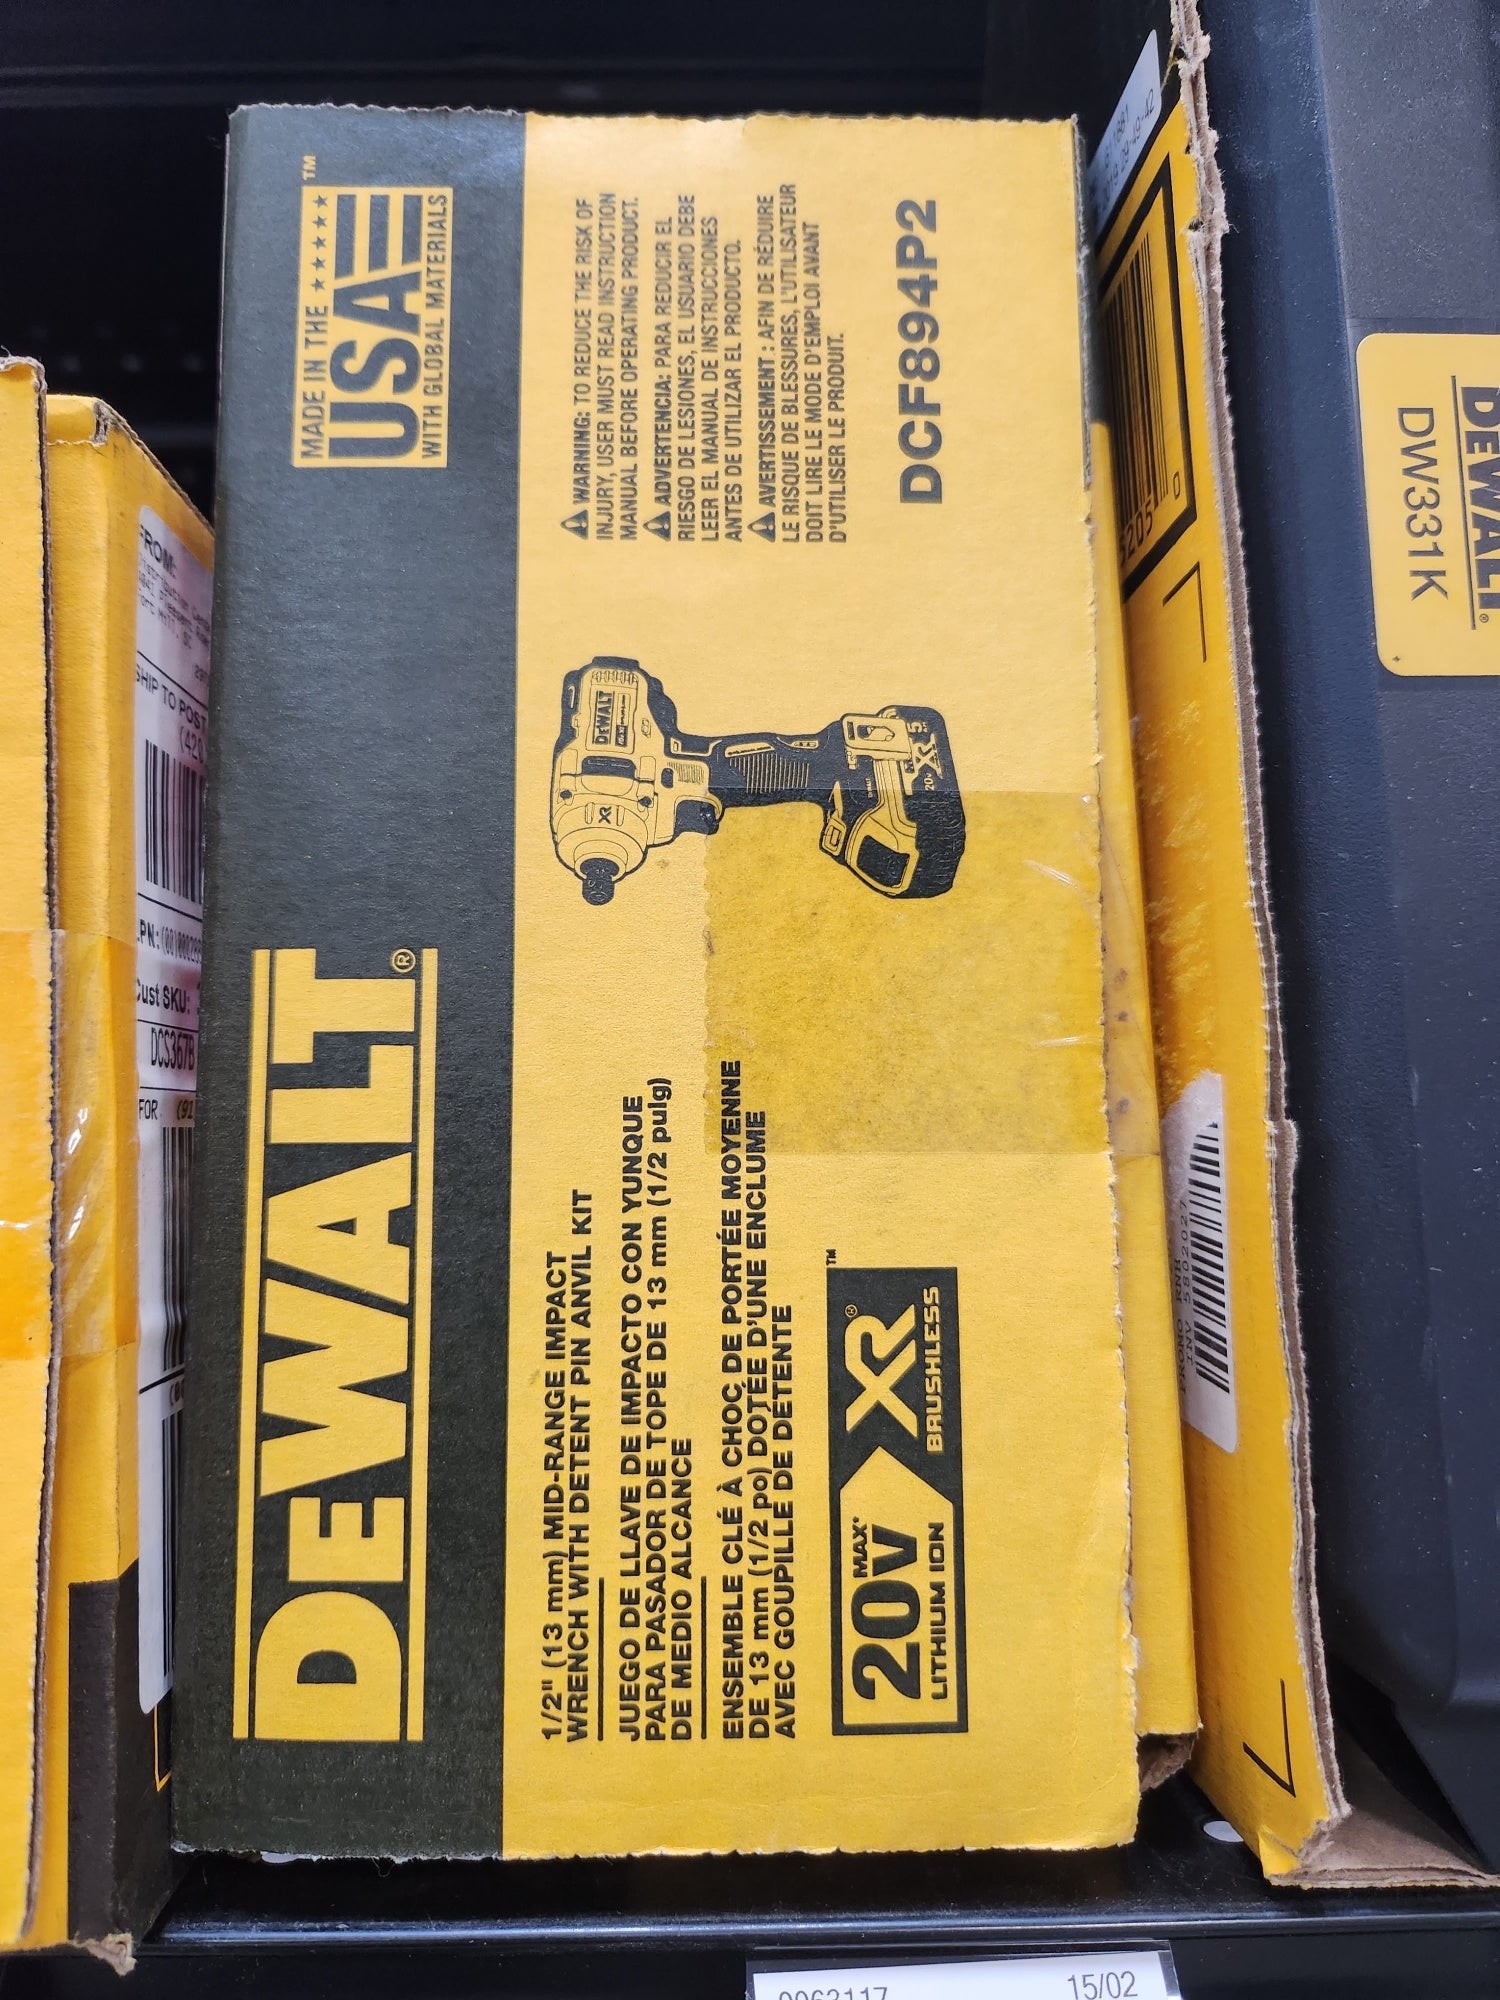 Dewalt 20V MAX* XR® 1/2 in. Mid-Range Cordless Impact Wrench with Detent Pin Anvil Kit -- DCF894P2